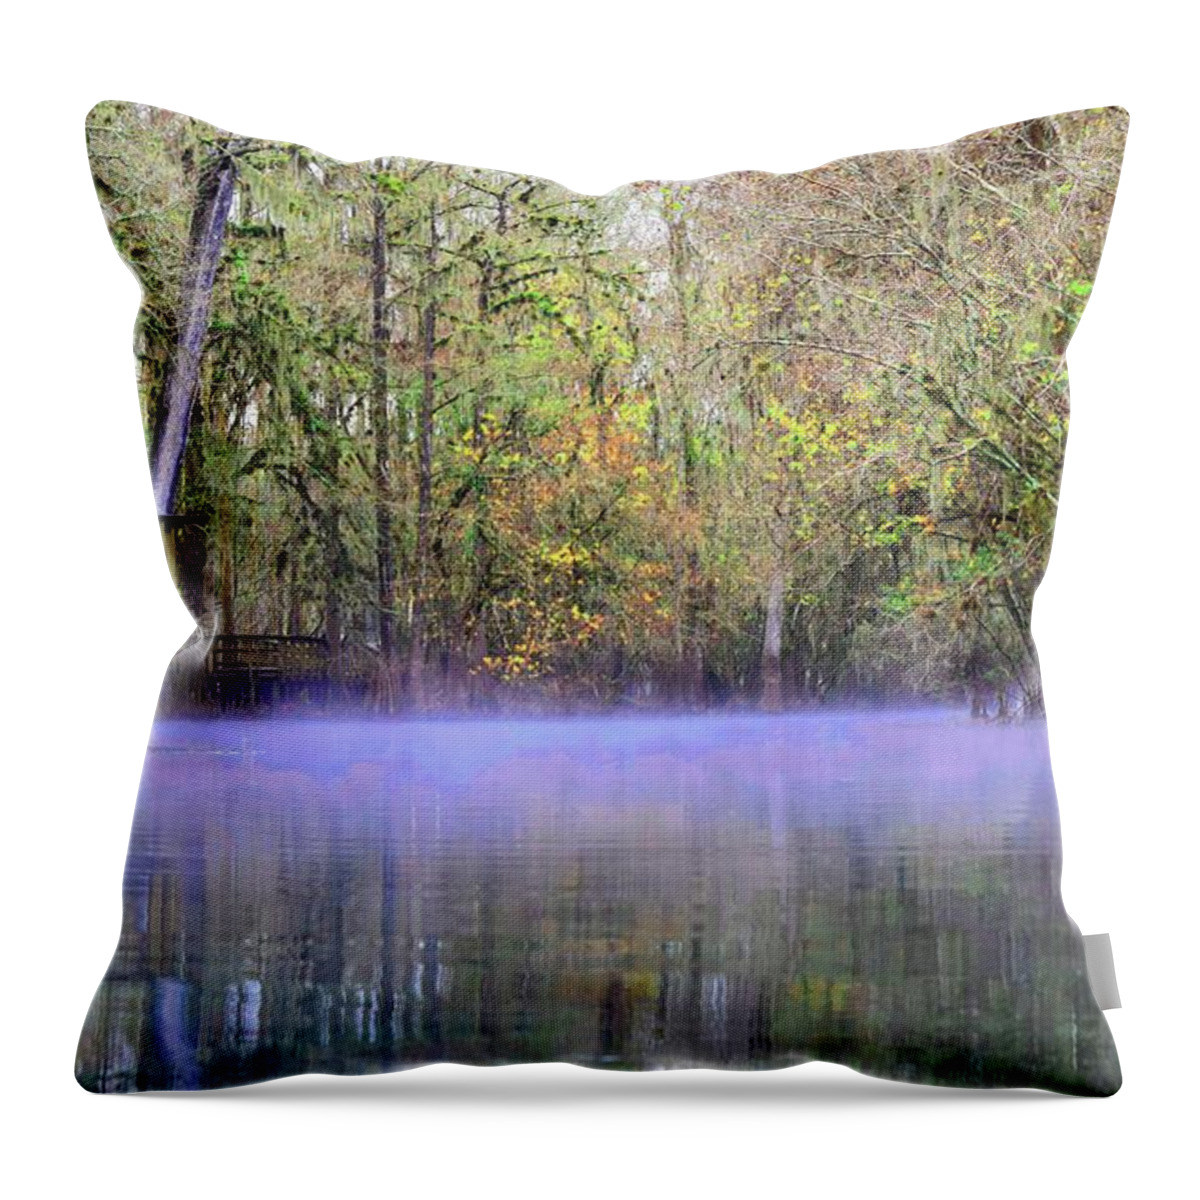 Fog Throw Pillow featuring the photograph Early Morning Springs by Sheri McLeroy